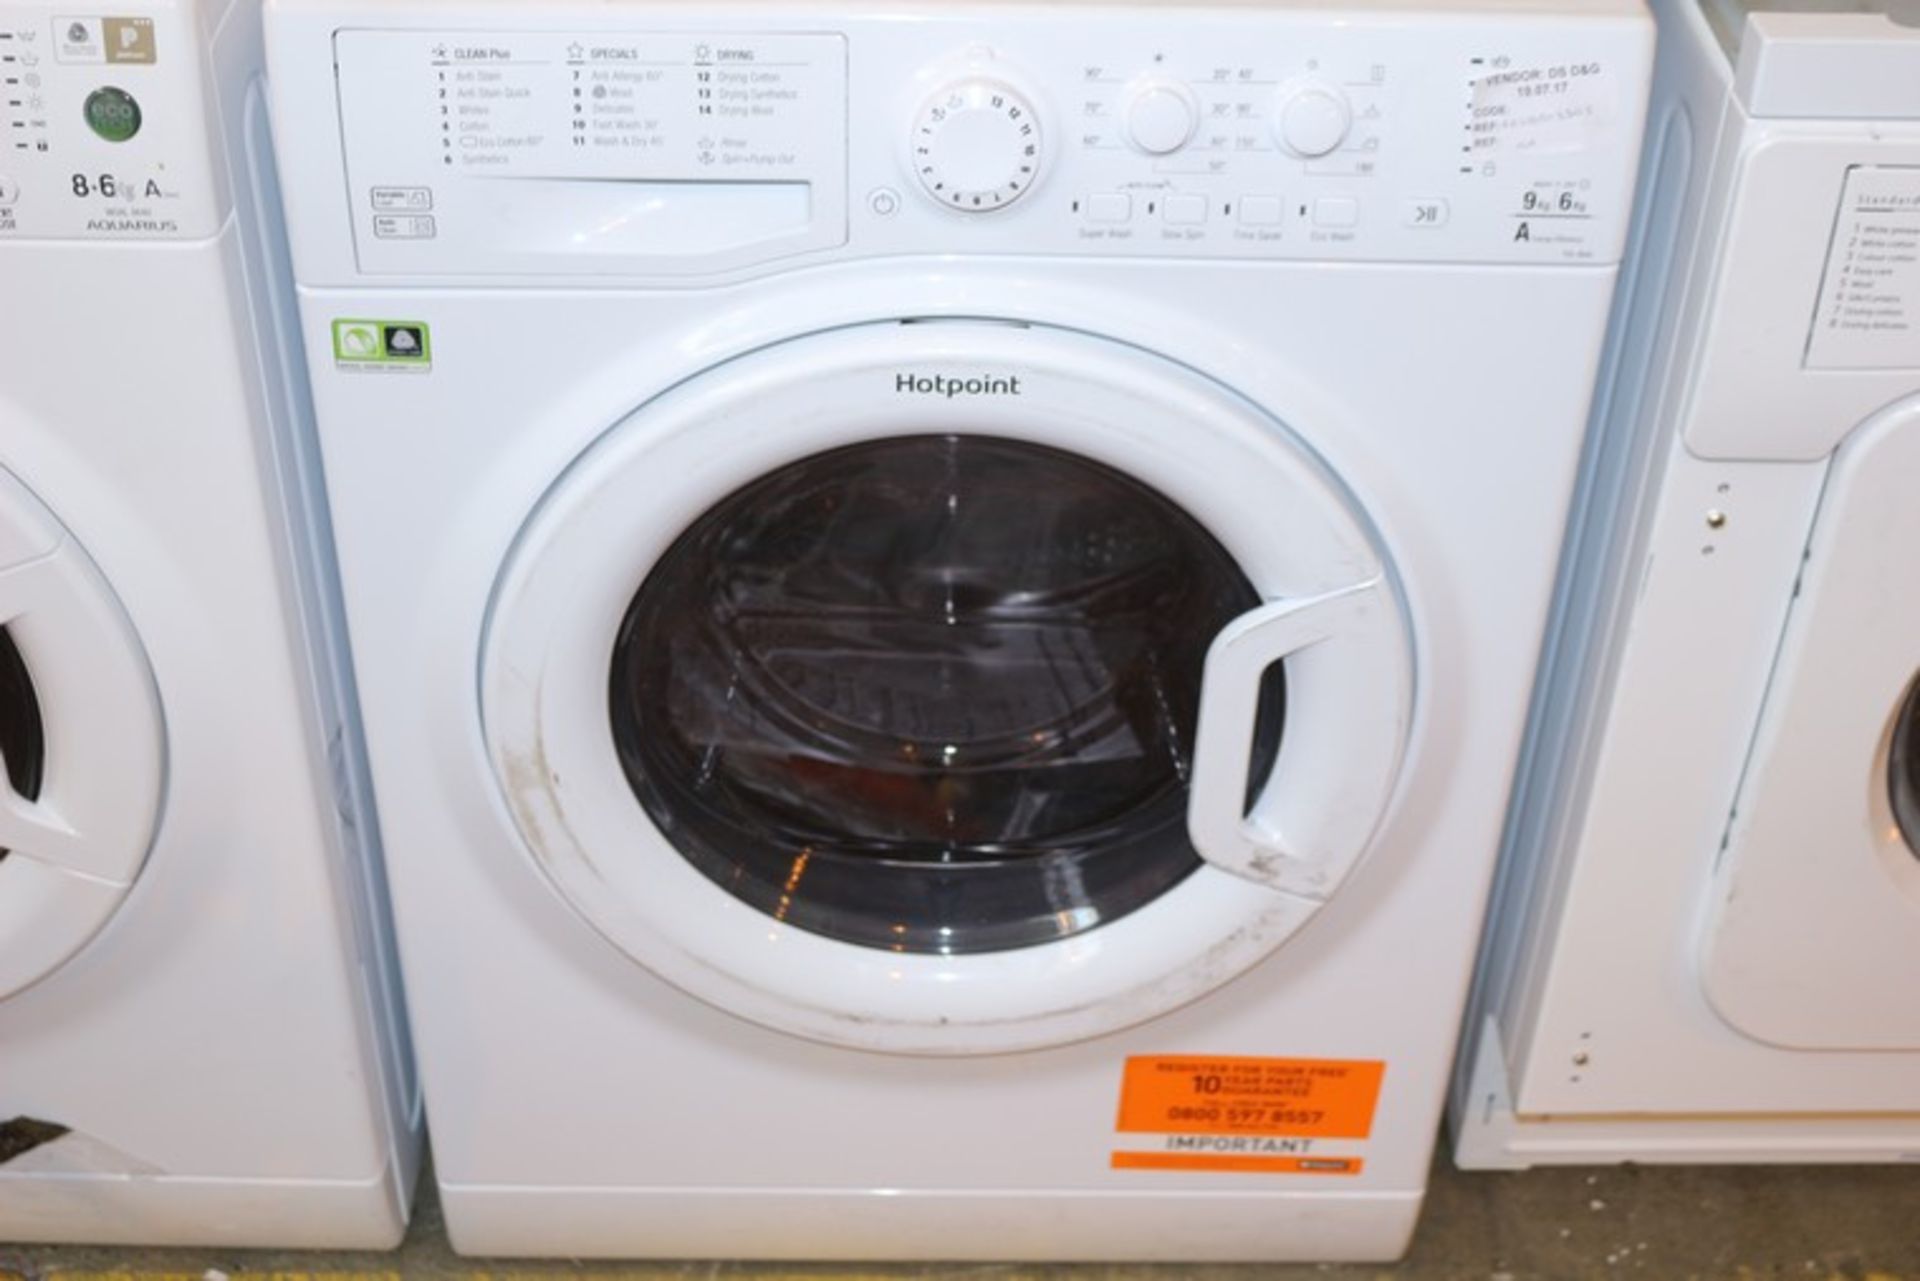 1 x HOTPOINT 9KG A ENERGY WASHING MACHINE RRP £450 (G650013305) *PLEASE NOTE THAT THE BID PRICE IS